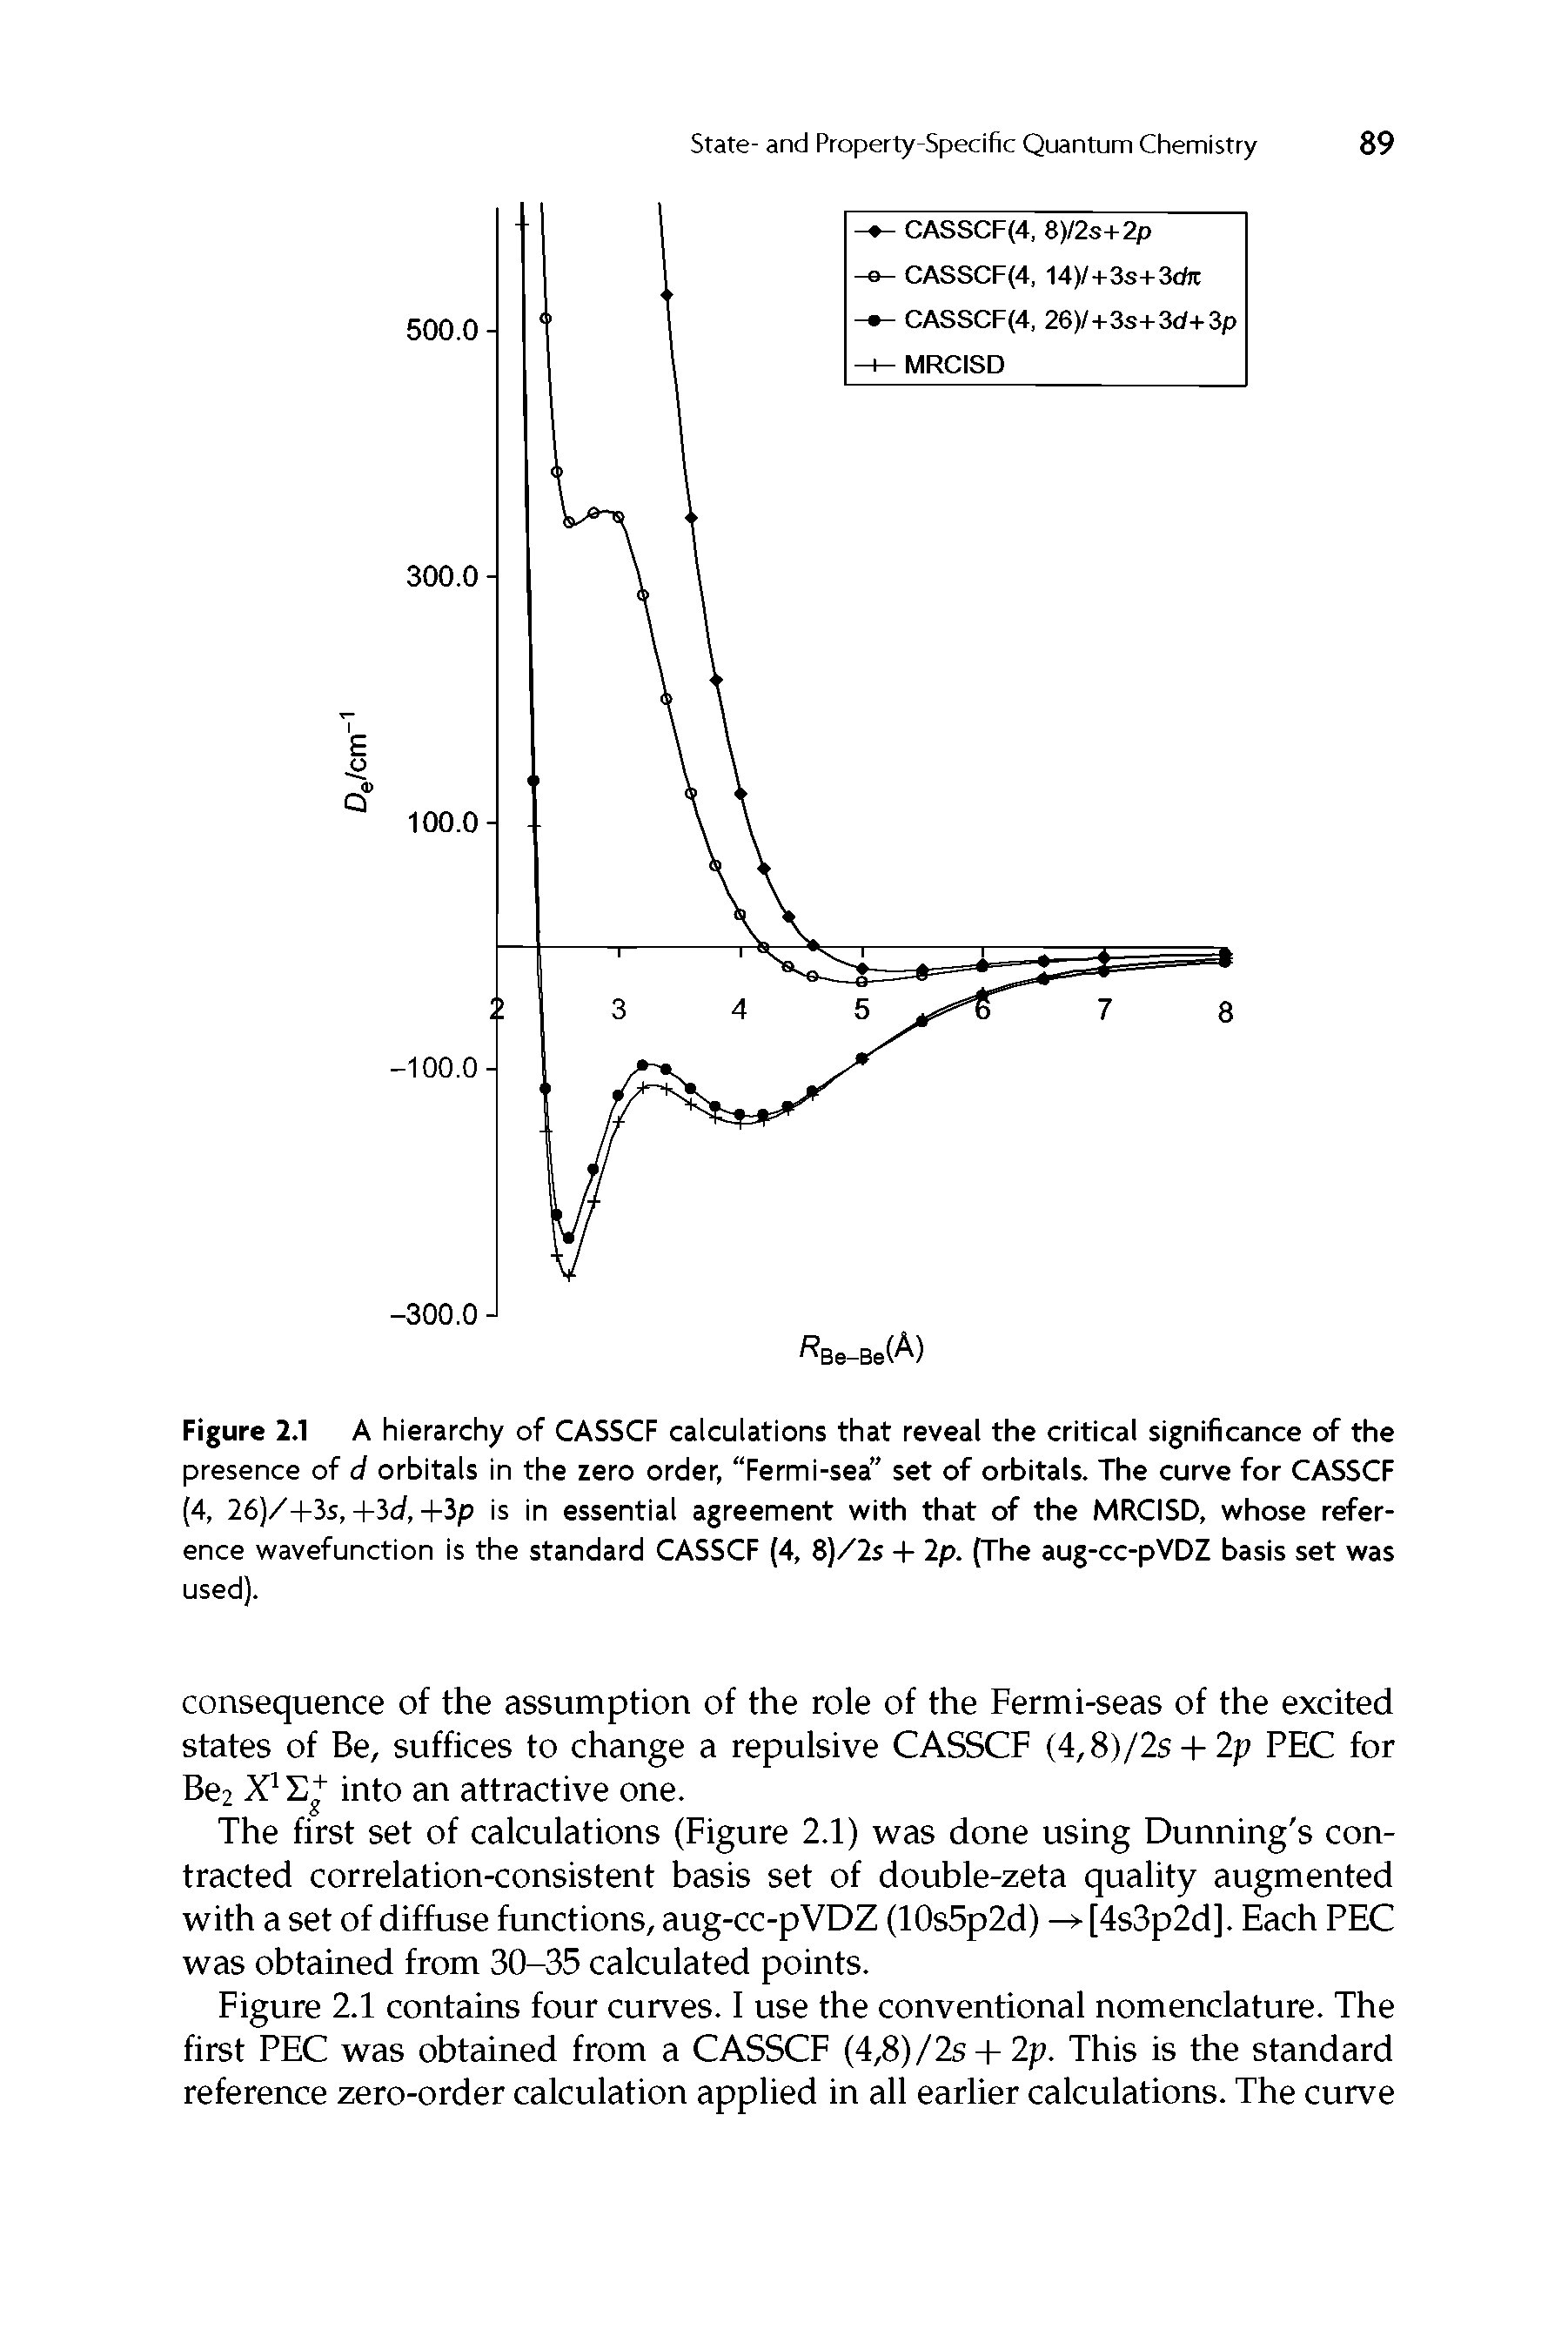 Figure 2.1 A hierarchy of CASSCF calculations that reveal the critical significance of the presence of d orbitals in the zero order, Fermi-sea set of orbitals. The curve for CASSCF (4, 26)/+3s, +3d, +3p is in essential agreement with that of the MRCISD, whose reference wavefunction is the standard CASSCF (4, 8)/2s -1- 2p. (The aug-cc-pVDZ basis set was used).